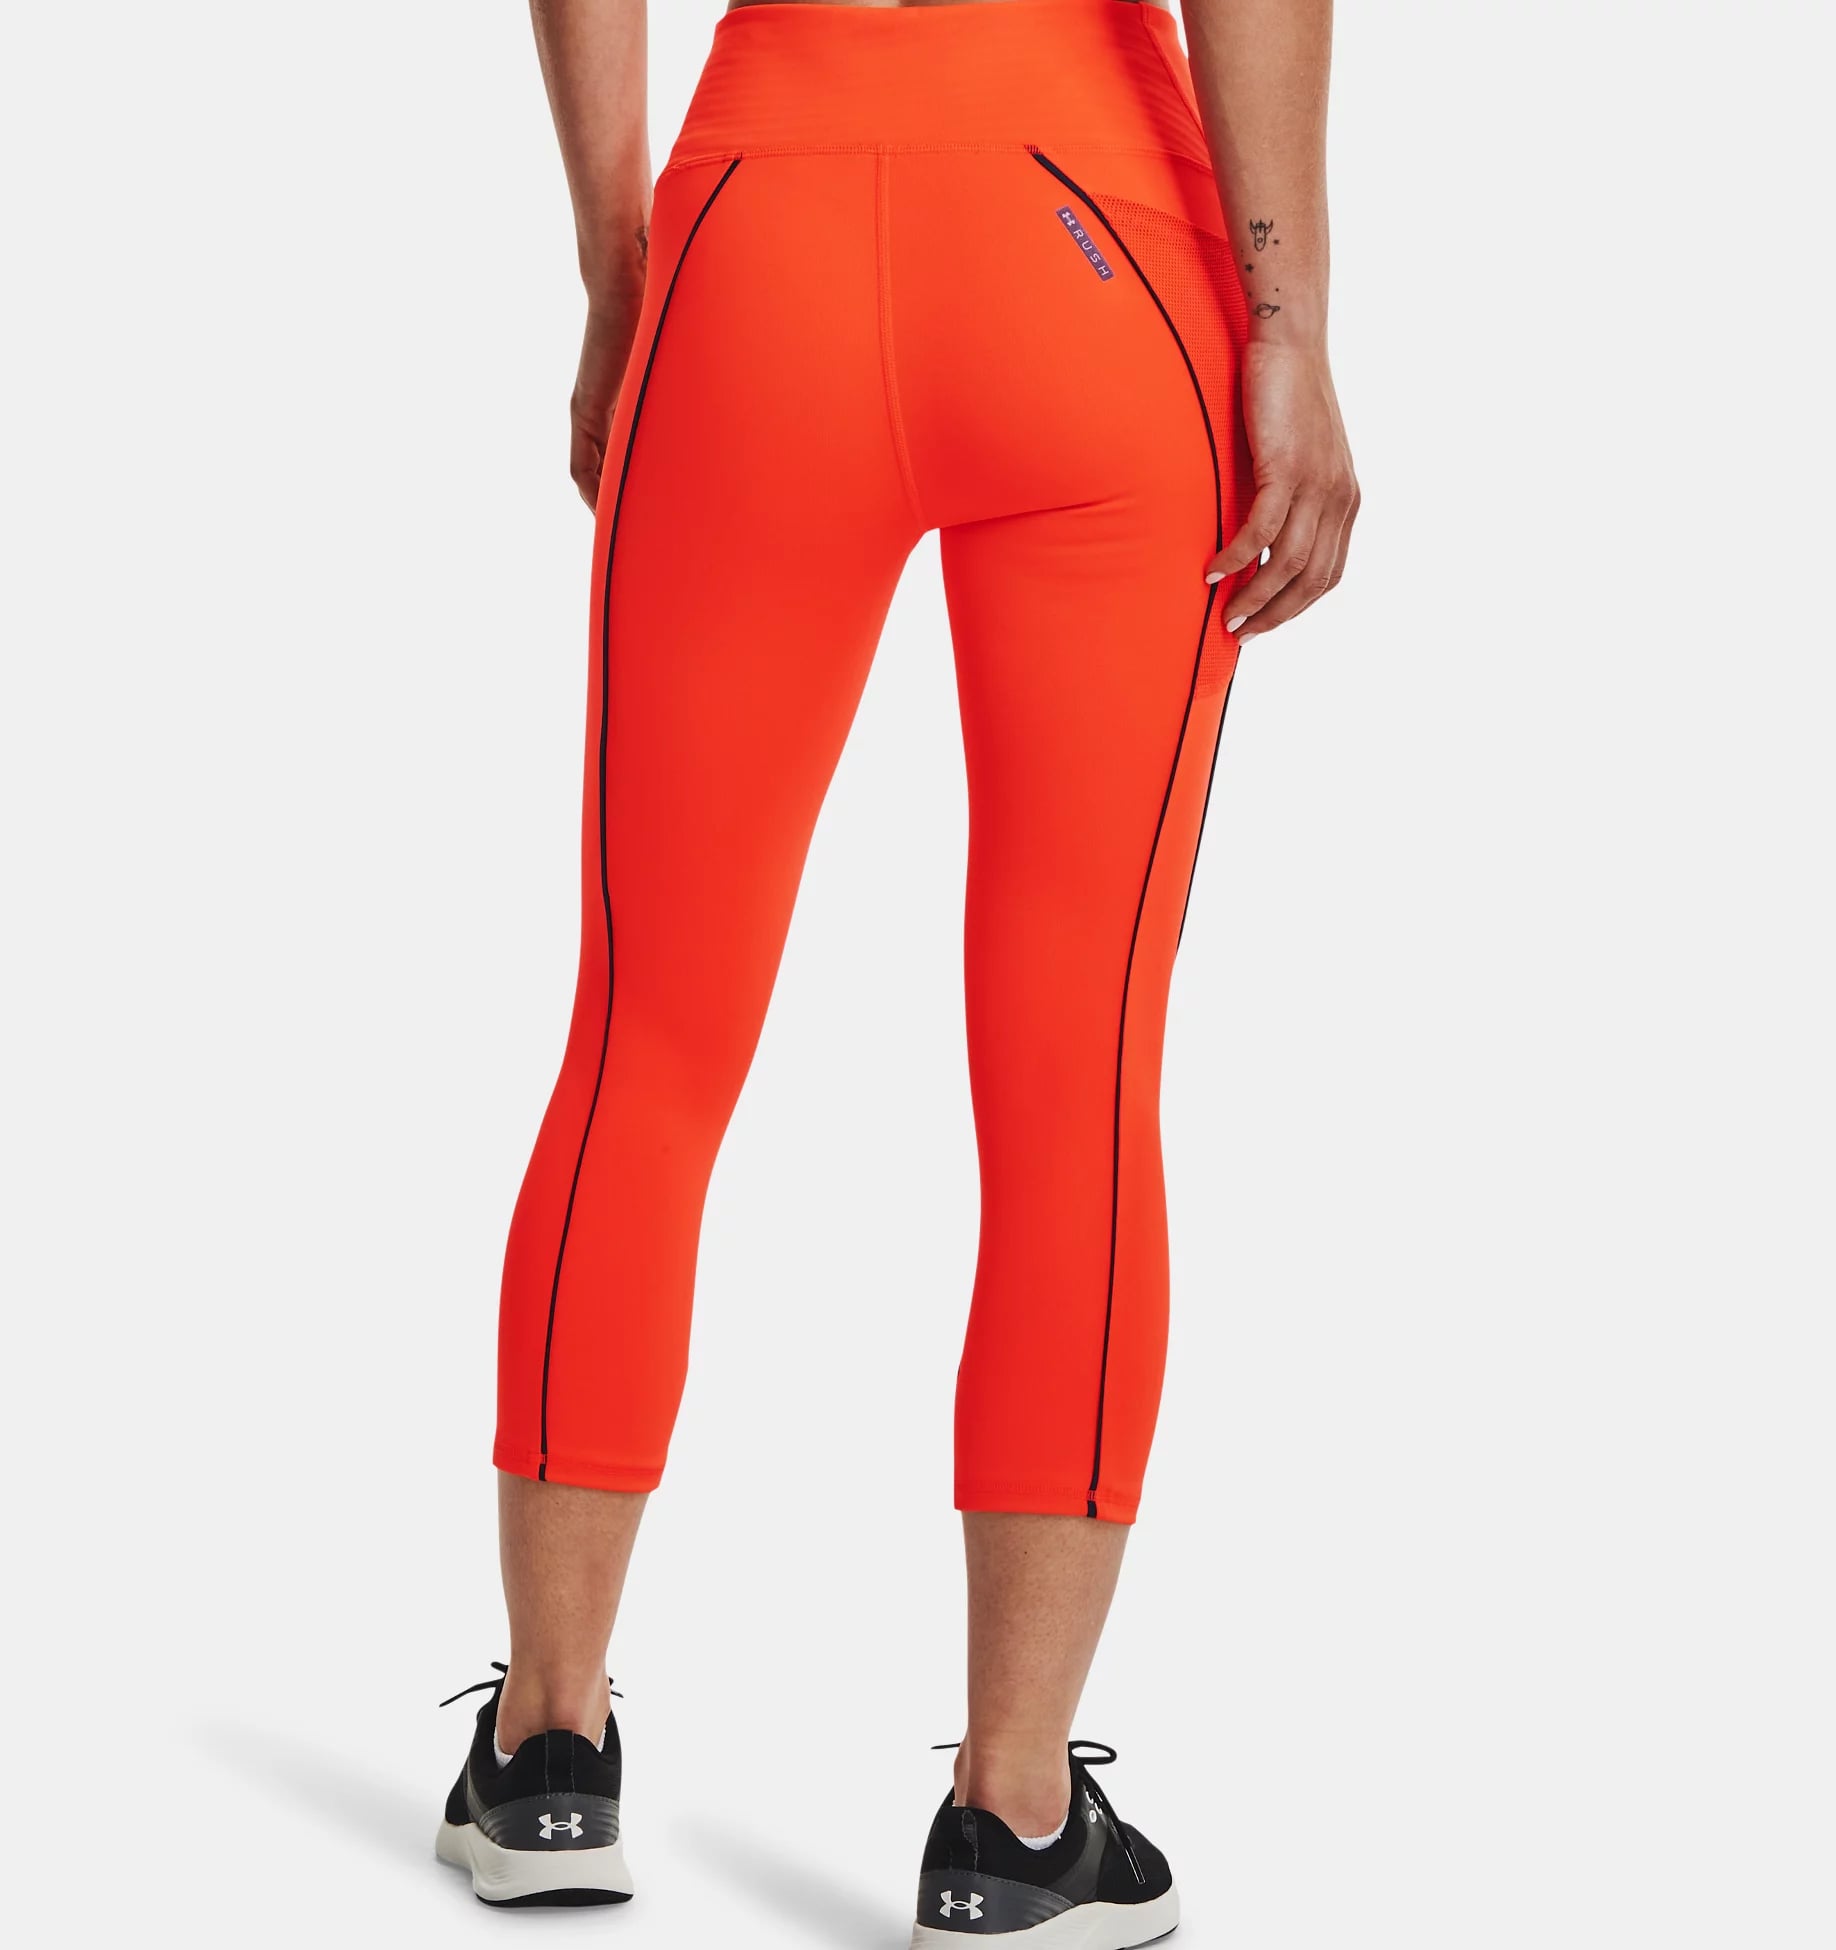 Best Under Armour Leggings With Pockets